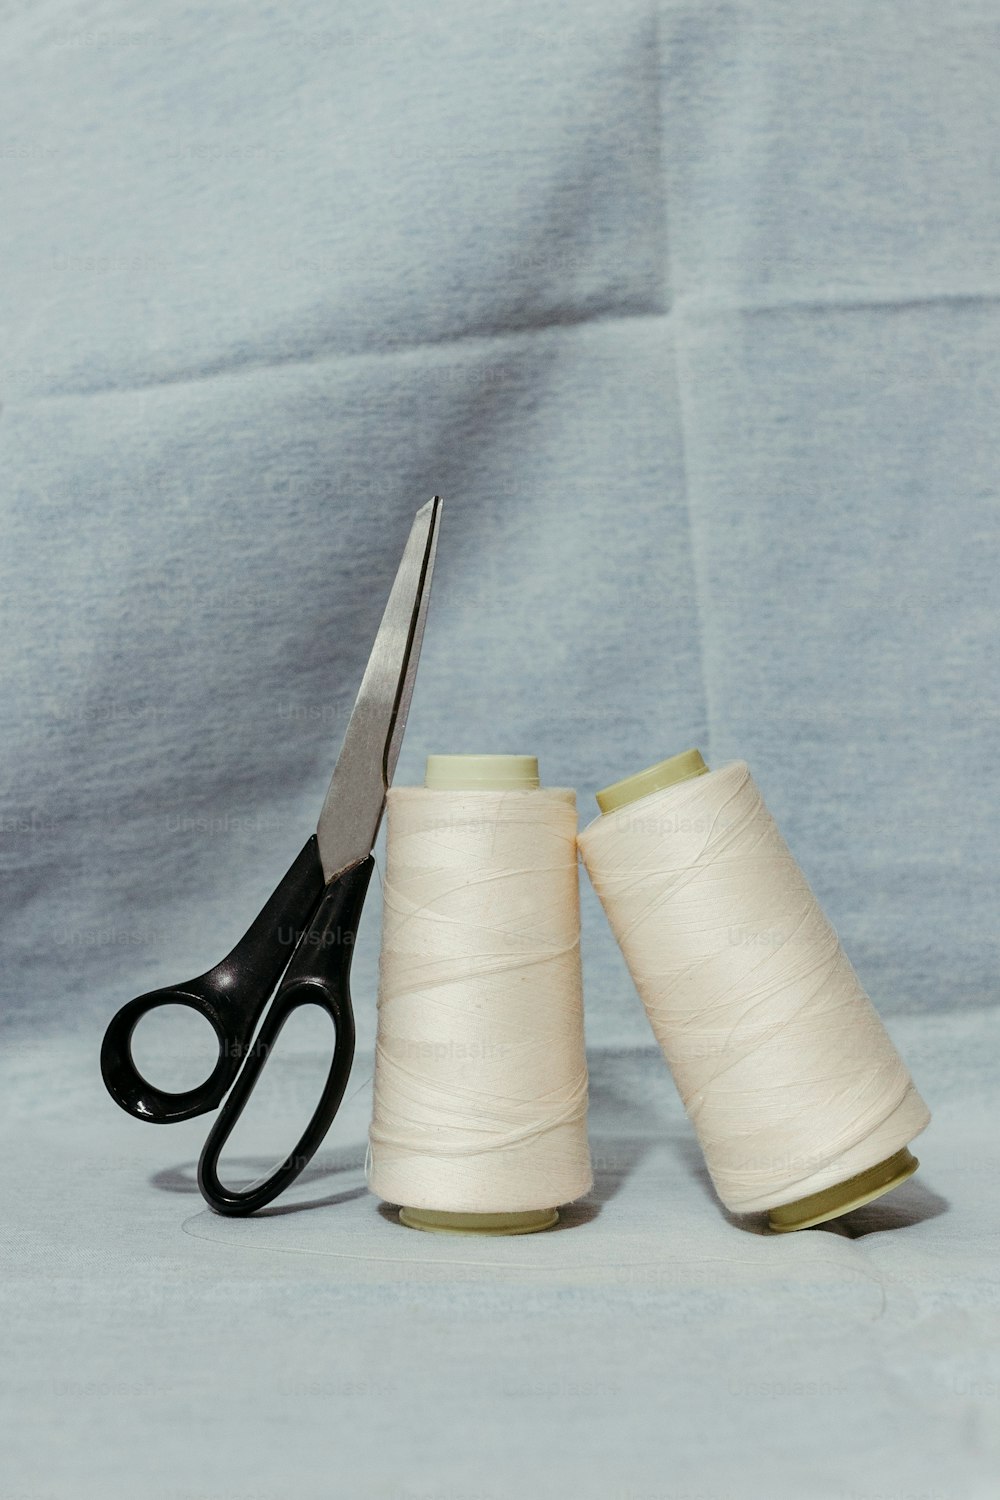 a pair of scissors sitting next to a pair of spools of thread